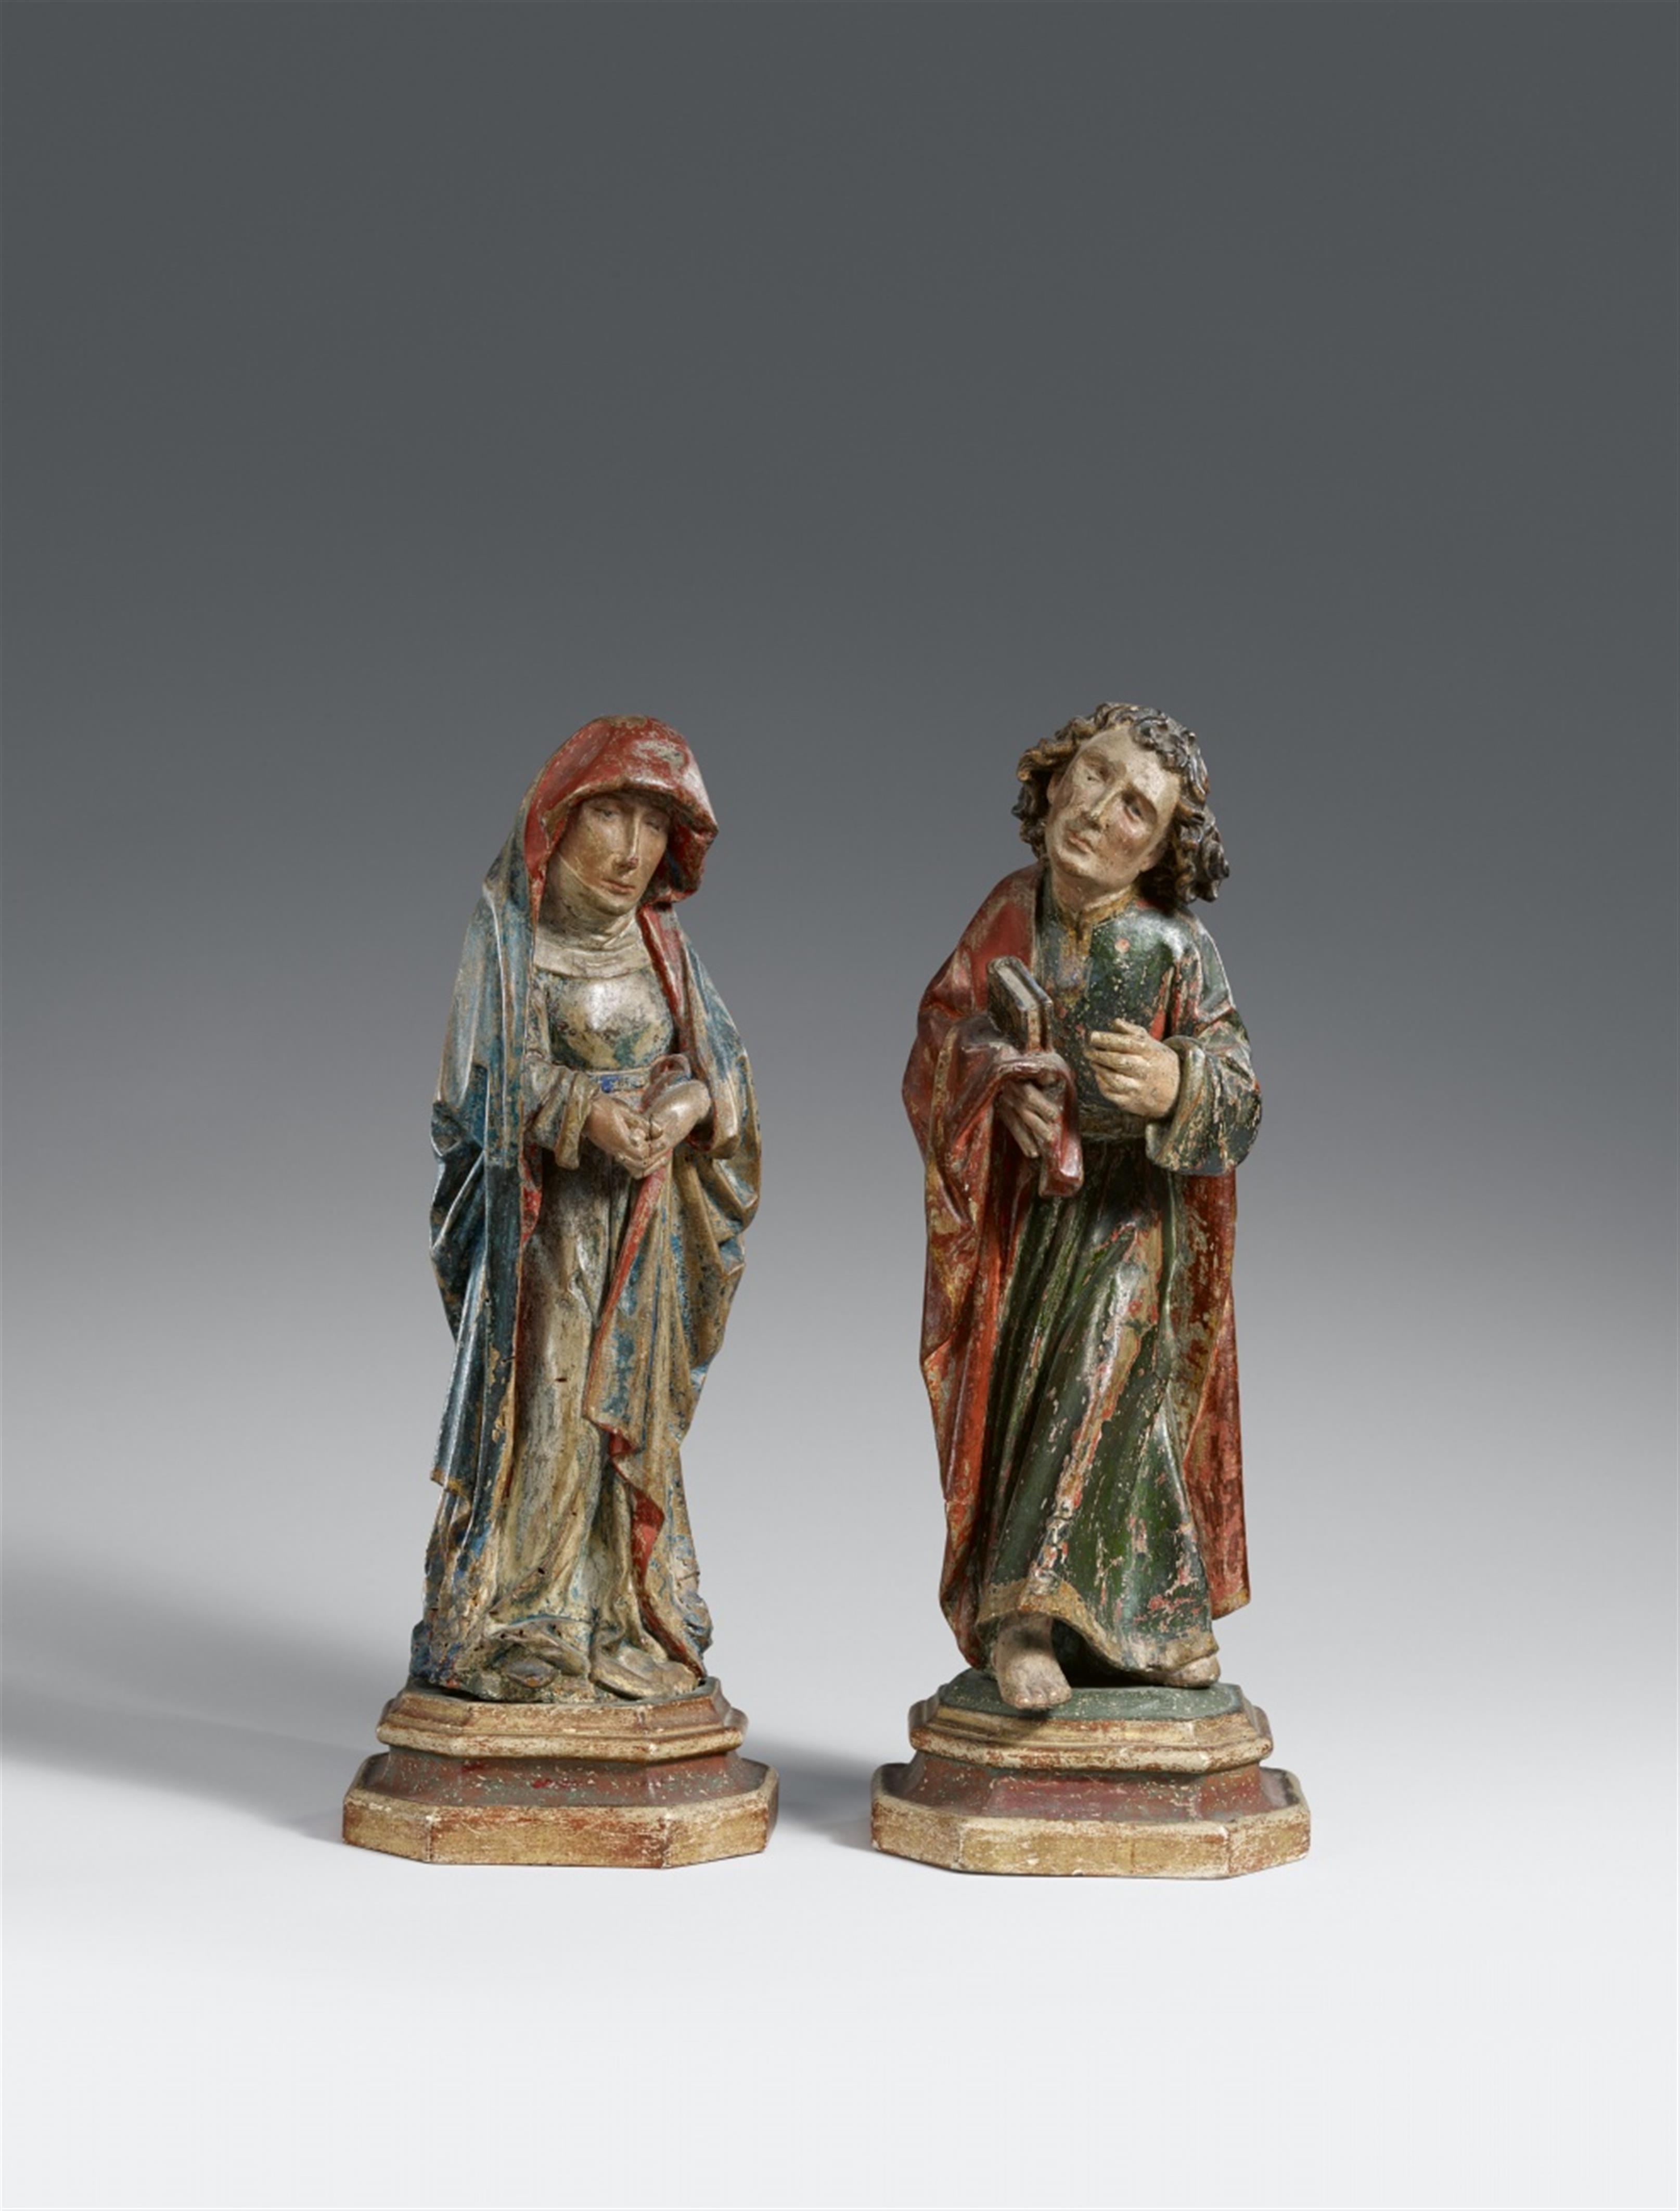 Alpenländisch late 15th century - Two late 15th century carved wooden figures of the Virgin and Saint John, Alpine Region - image-1